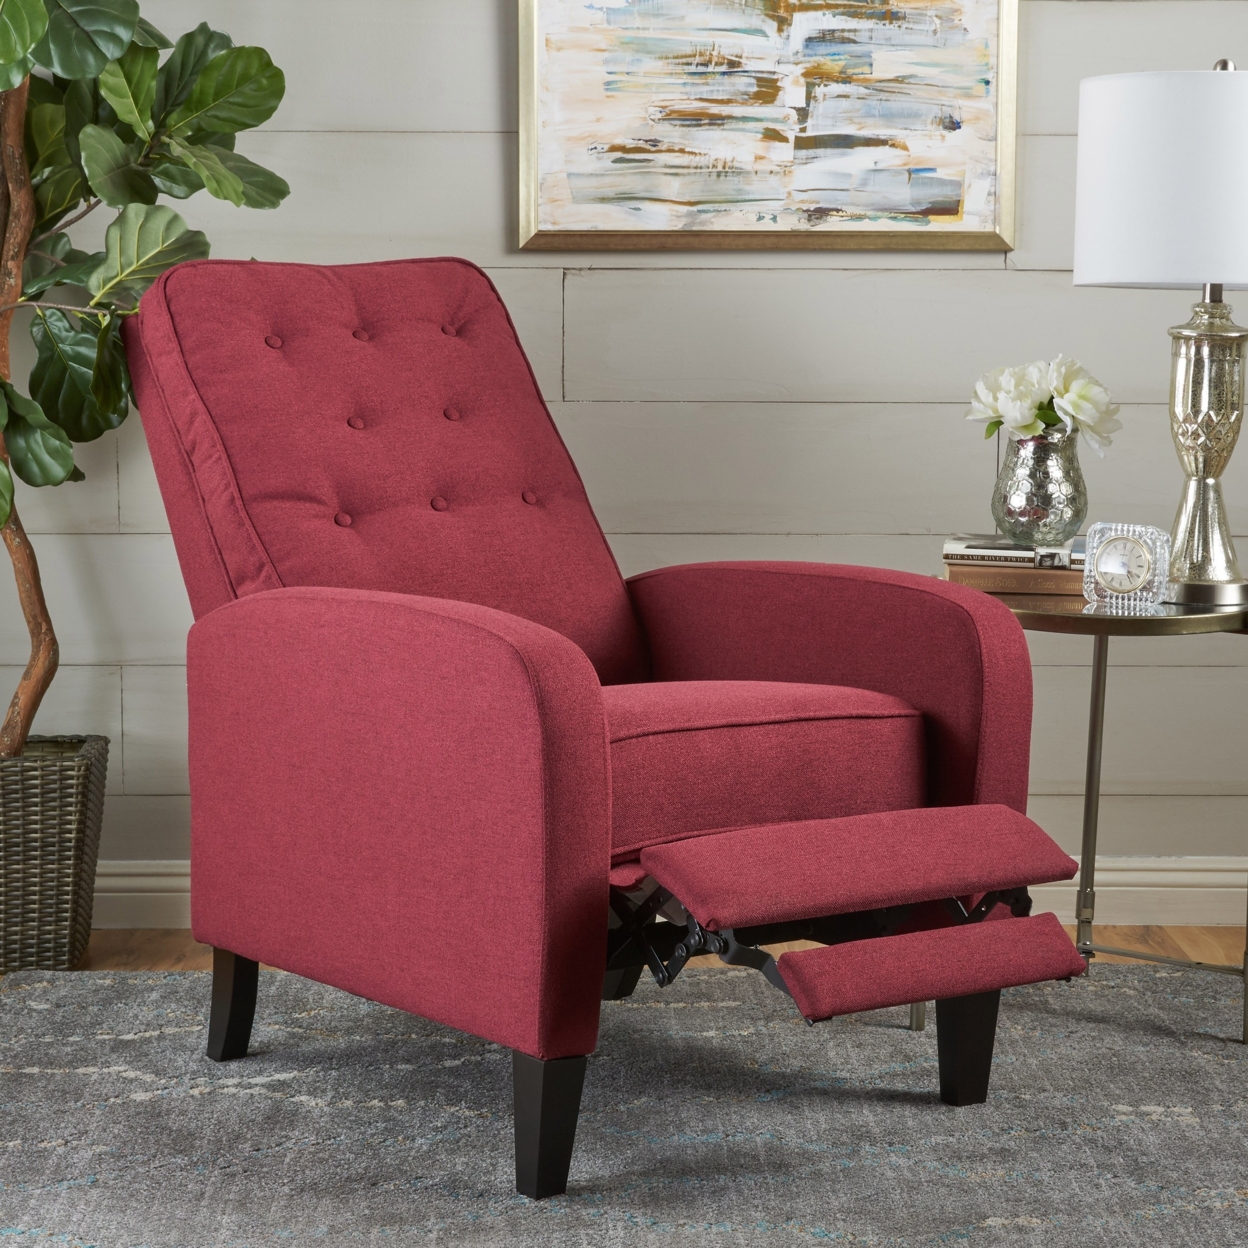 Nissa Tufted Back Fabric Recliner - Deep Red